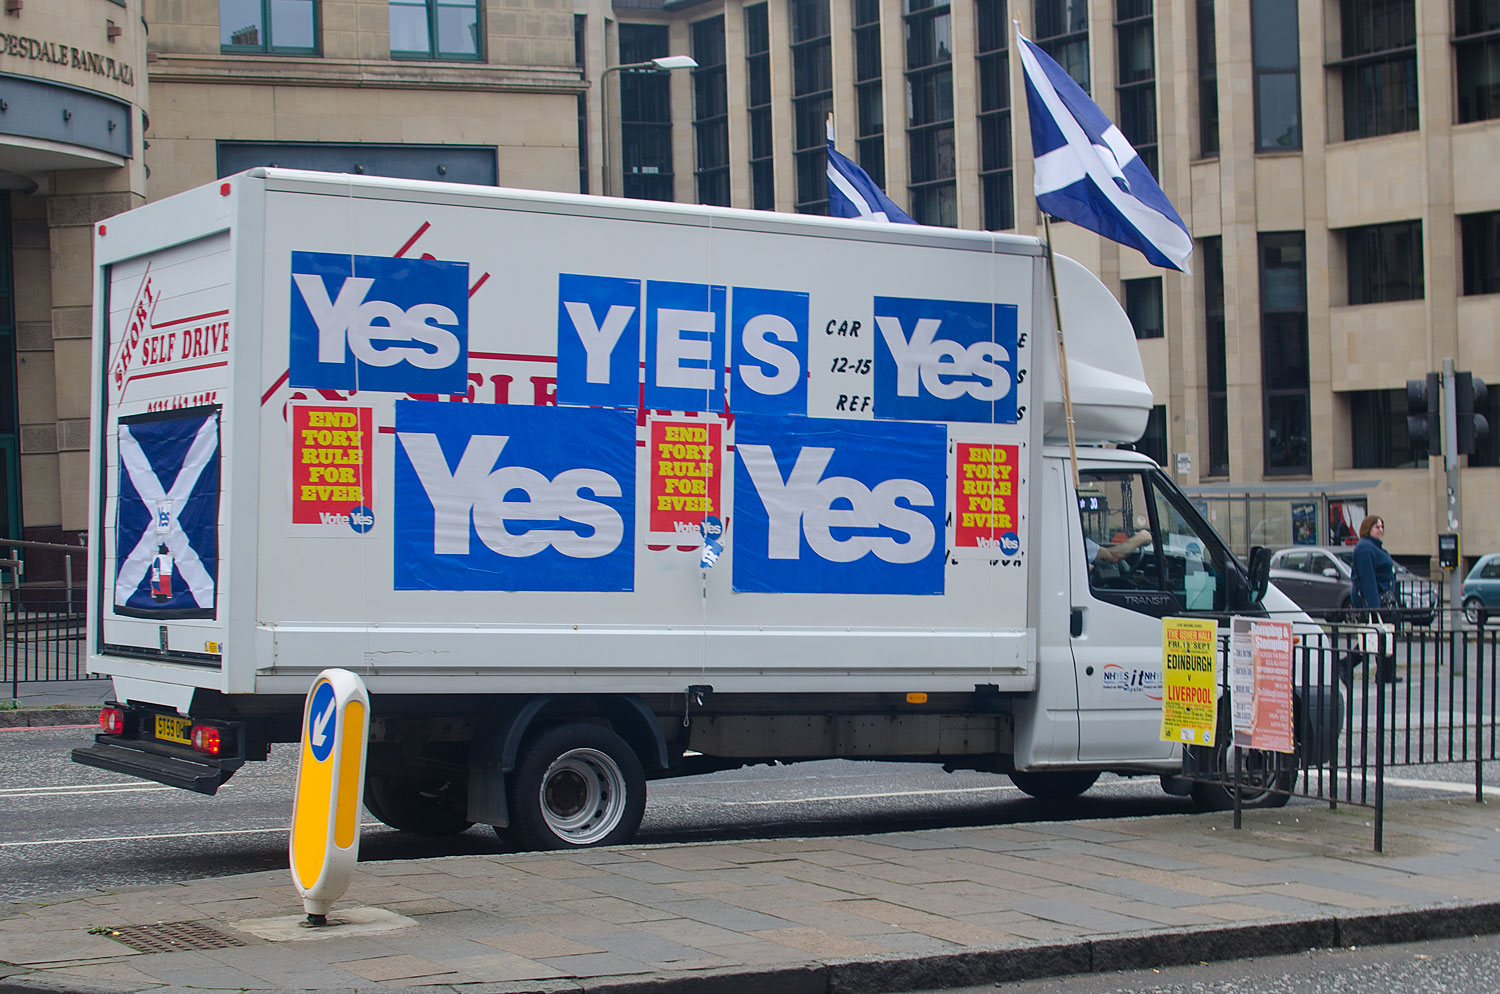 The yes campaign is focusing on being visible on the street on this last day of campaigning.